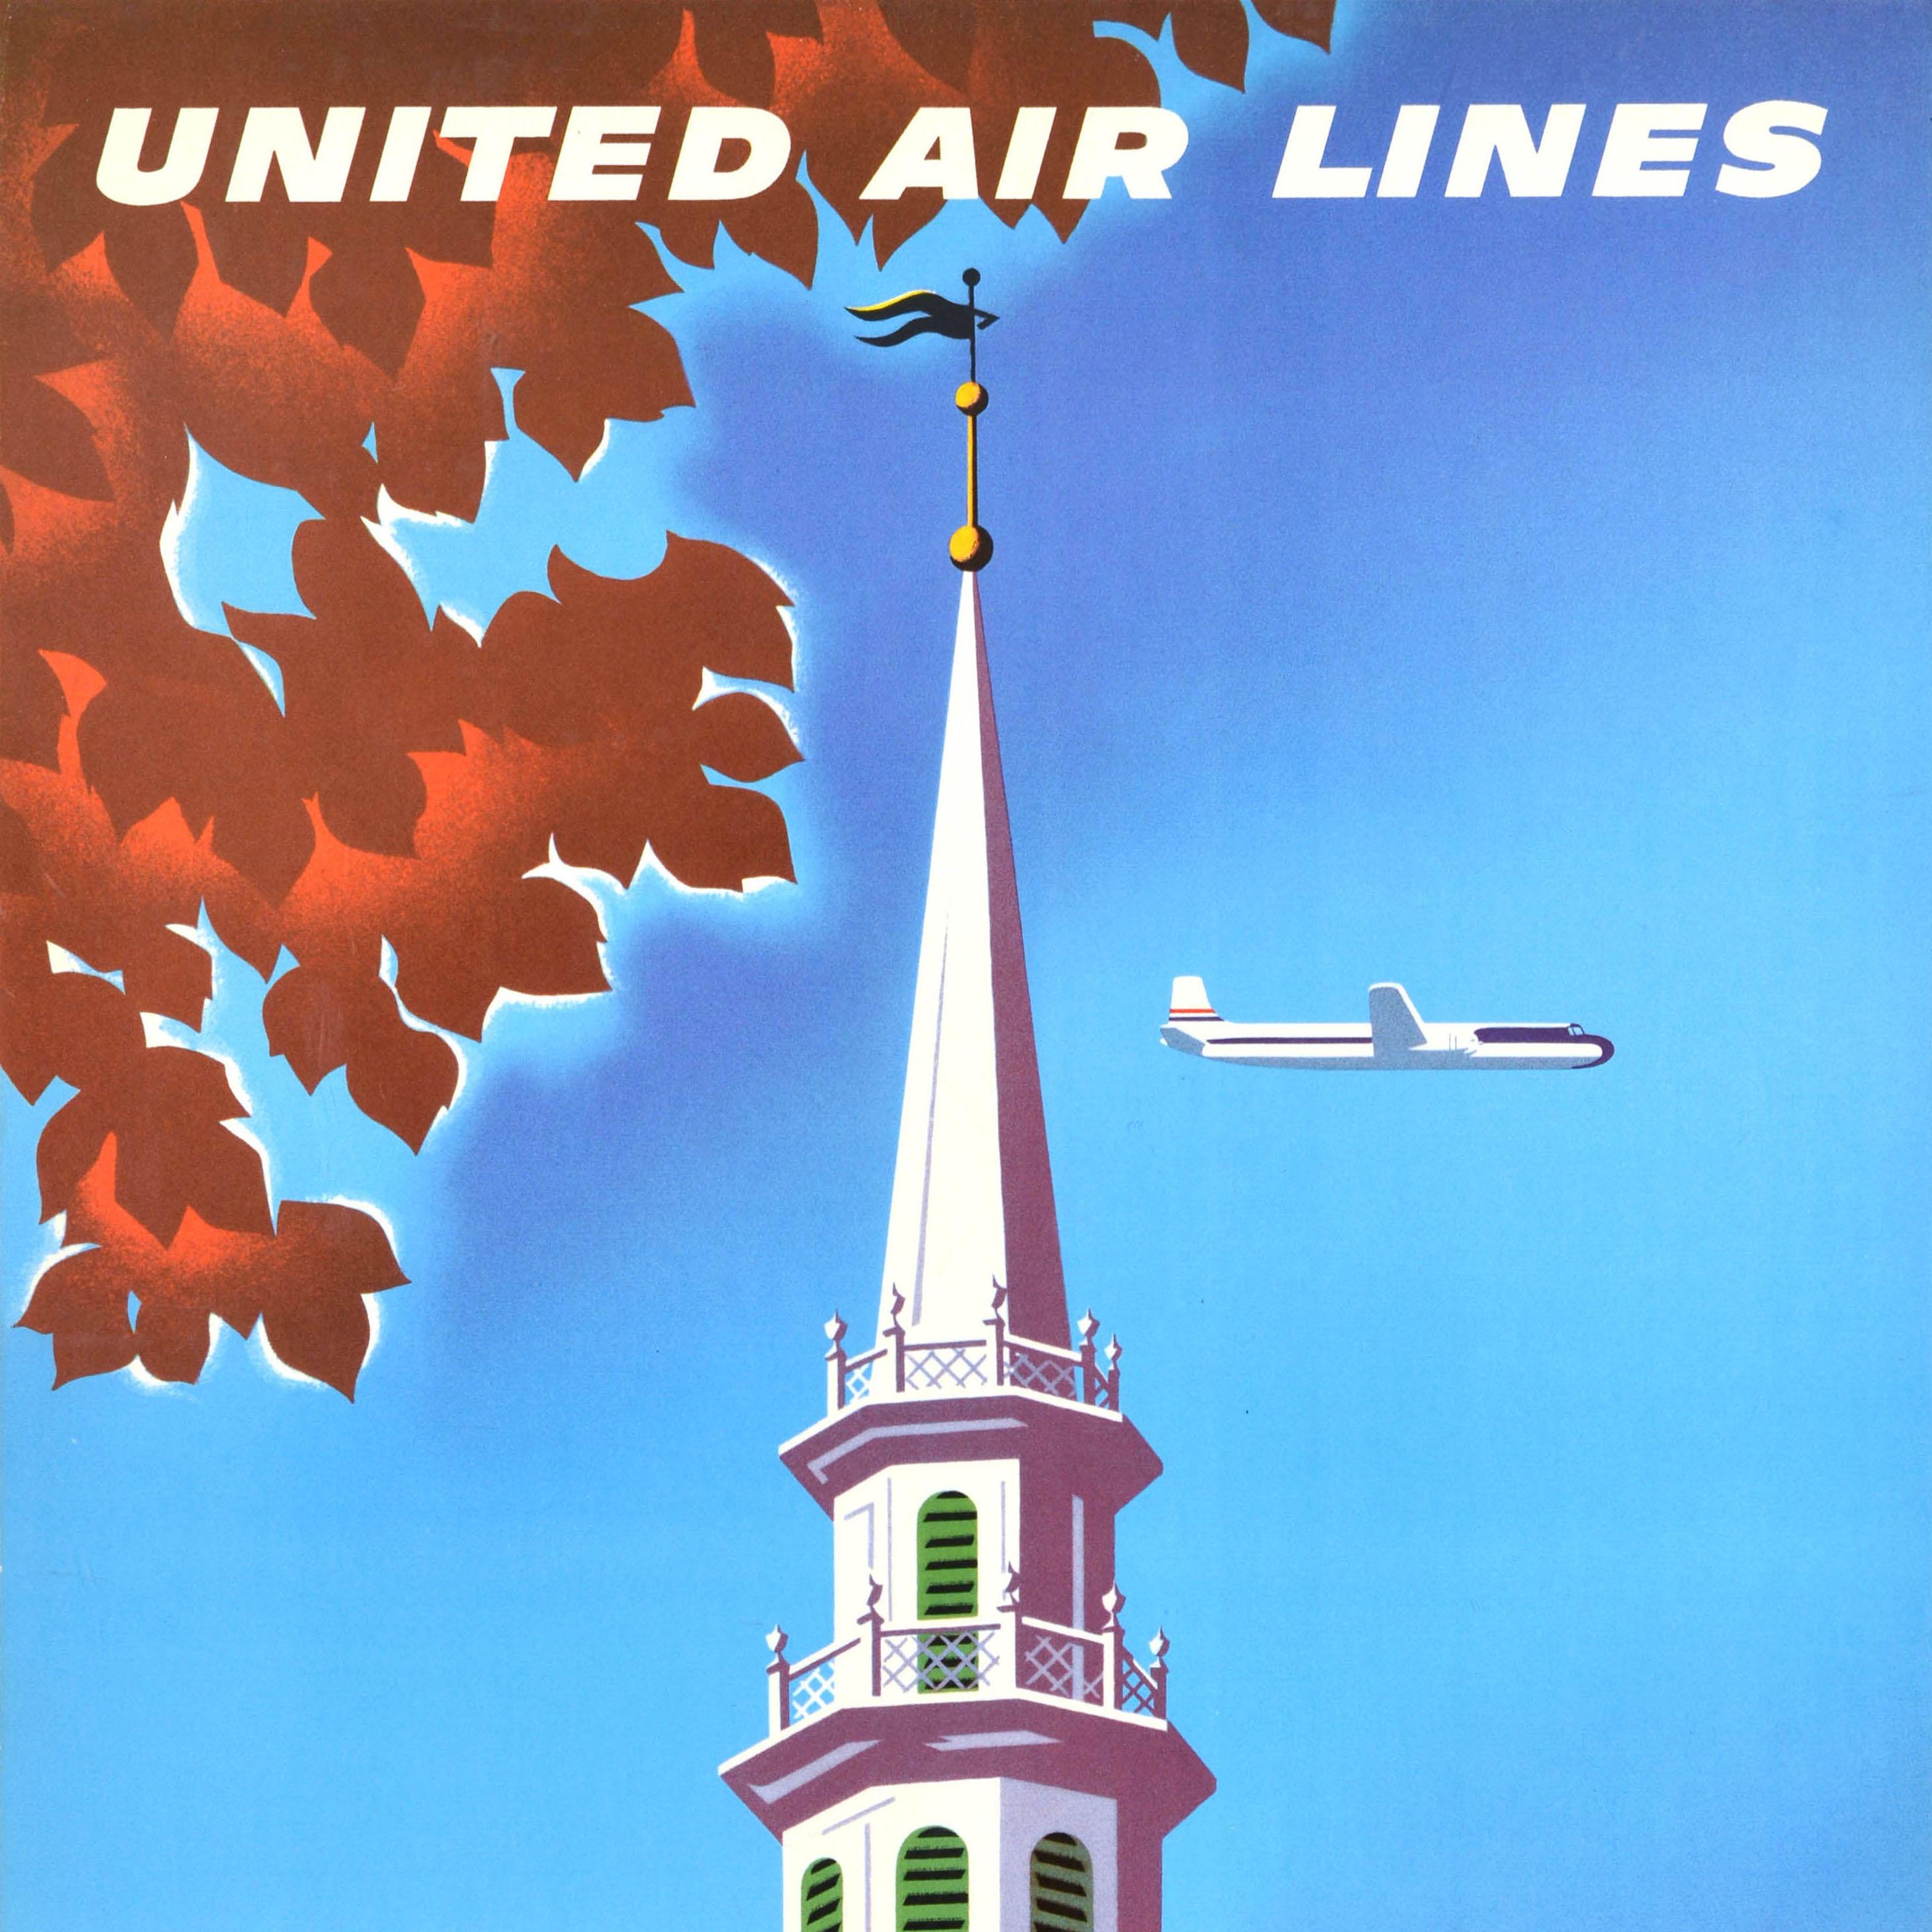 Original vintage travel advertising poster for United Air Lines New England featuring artwork by the Austrian-born graphic designer Joseph Binder (1898-1972) depicting a plane flying behind a clock tower framed by trees with autumn brown and yellow